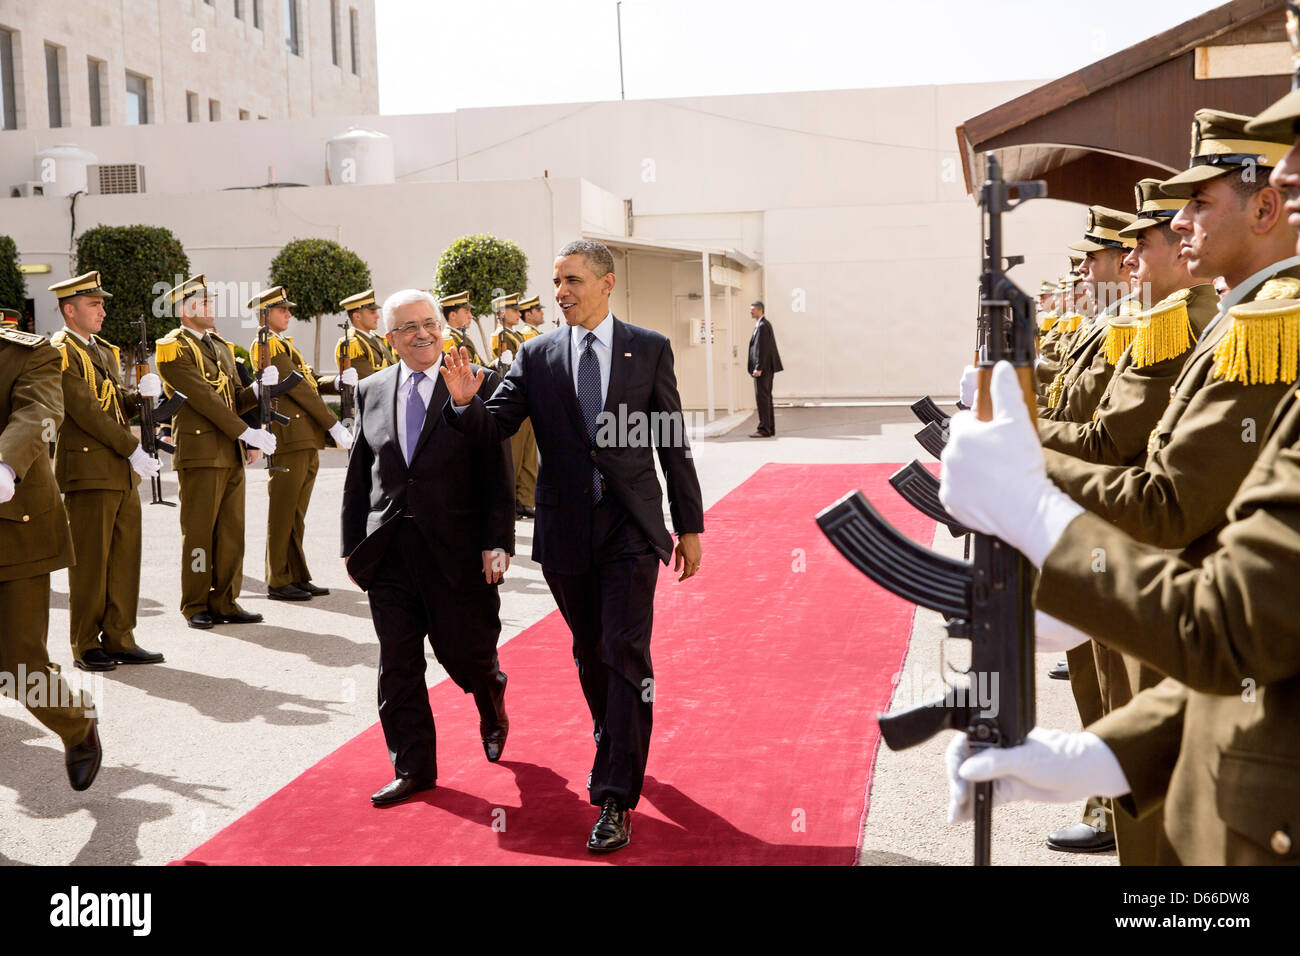 US President Barack Obama walks with President Mahmoud Abbas of the Palestinian Authority before departing the Mugata Presidential Compound March 21, 2013 in Ramallah, the West Bank. Stock Photo